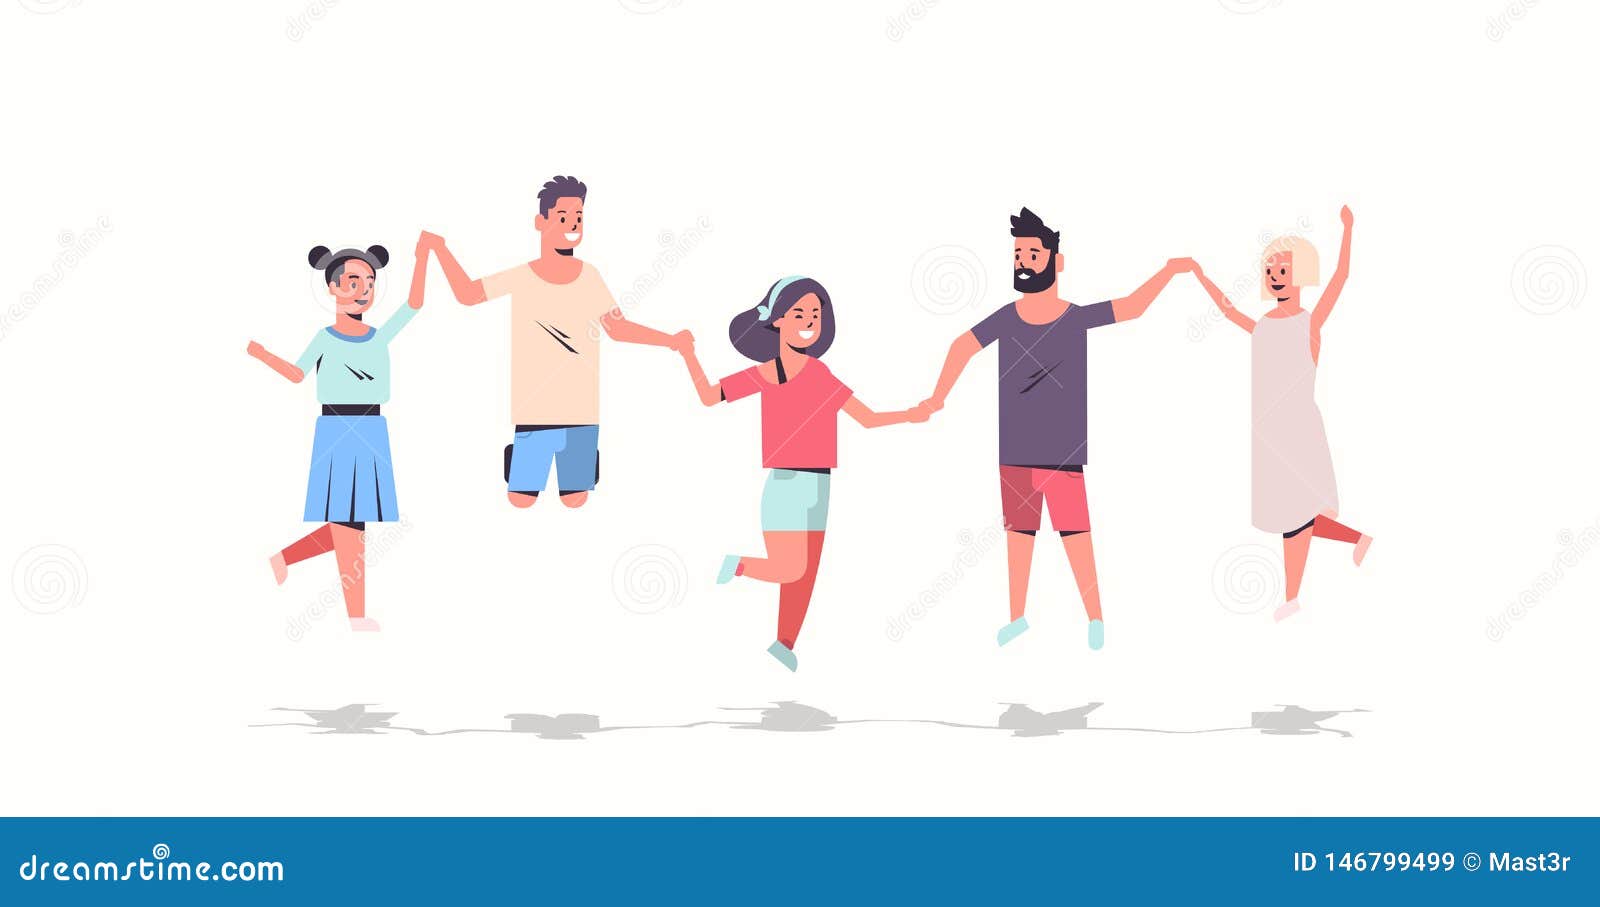 Young People Group Holding Hands Men Women Jumping Together Friends Having  Fun Male Female Cartoon Characters Full Stock Vector - Illustration of  horizontal, concept: 146799499